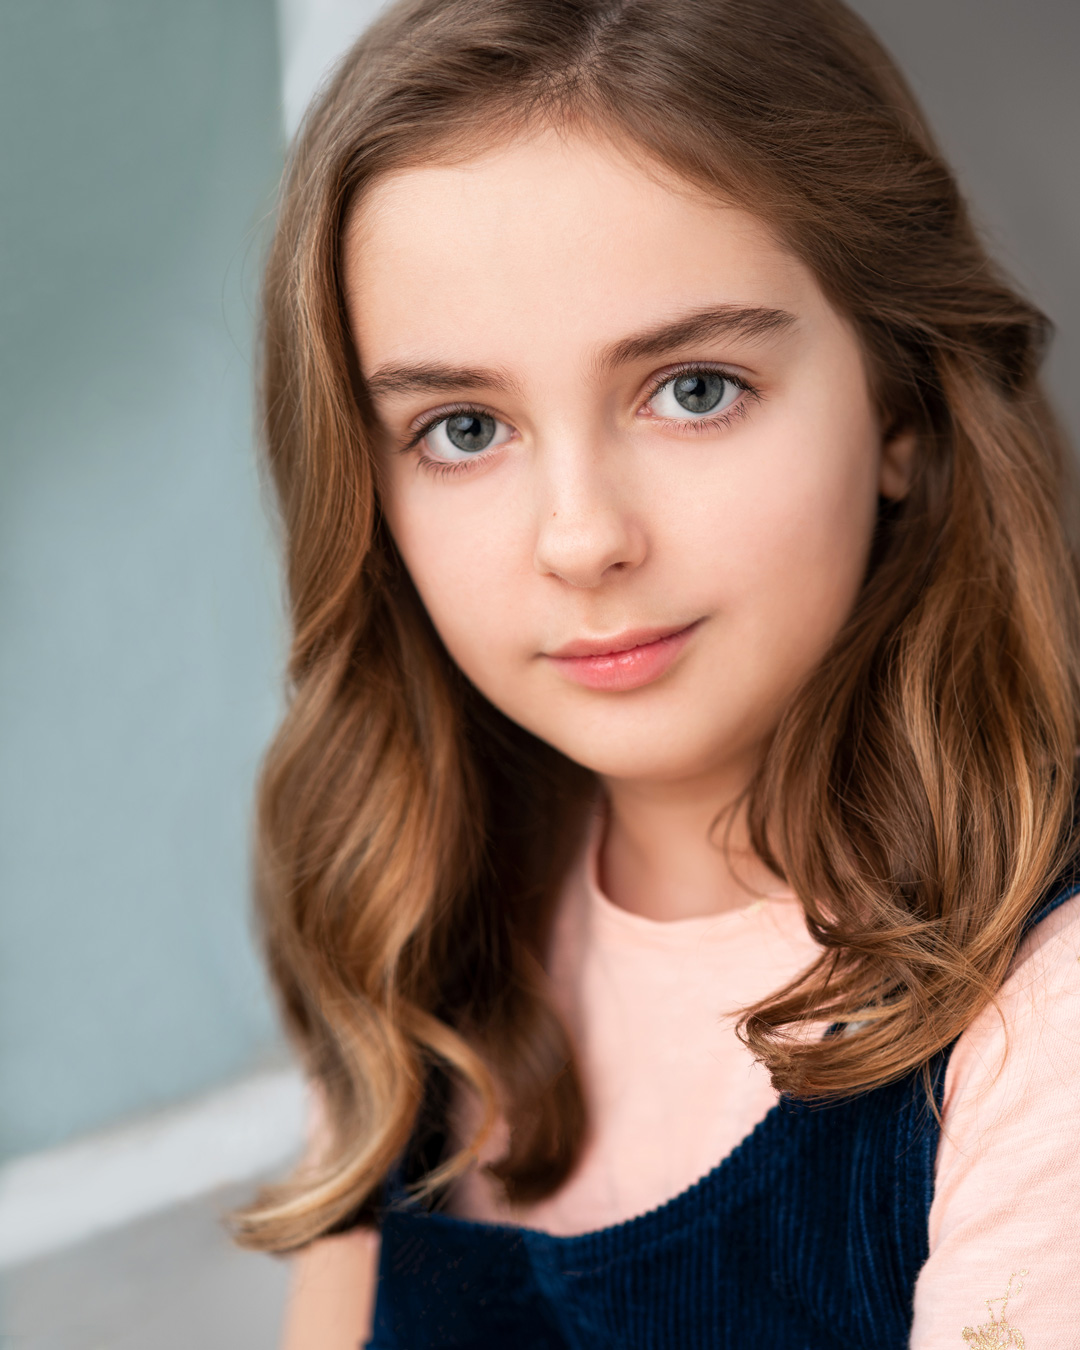 Actors headshot of child actor Ana Lale from LeBlanc school of acting